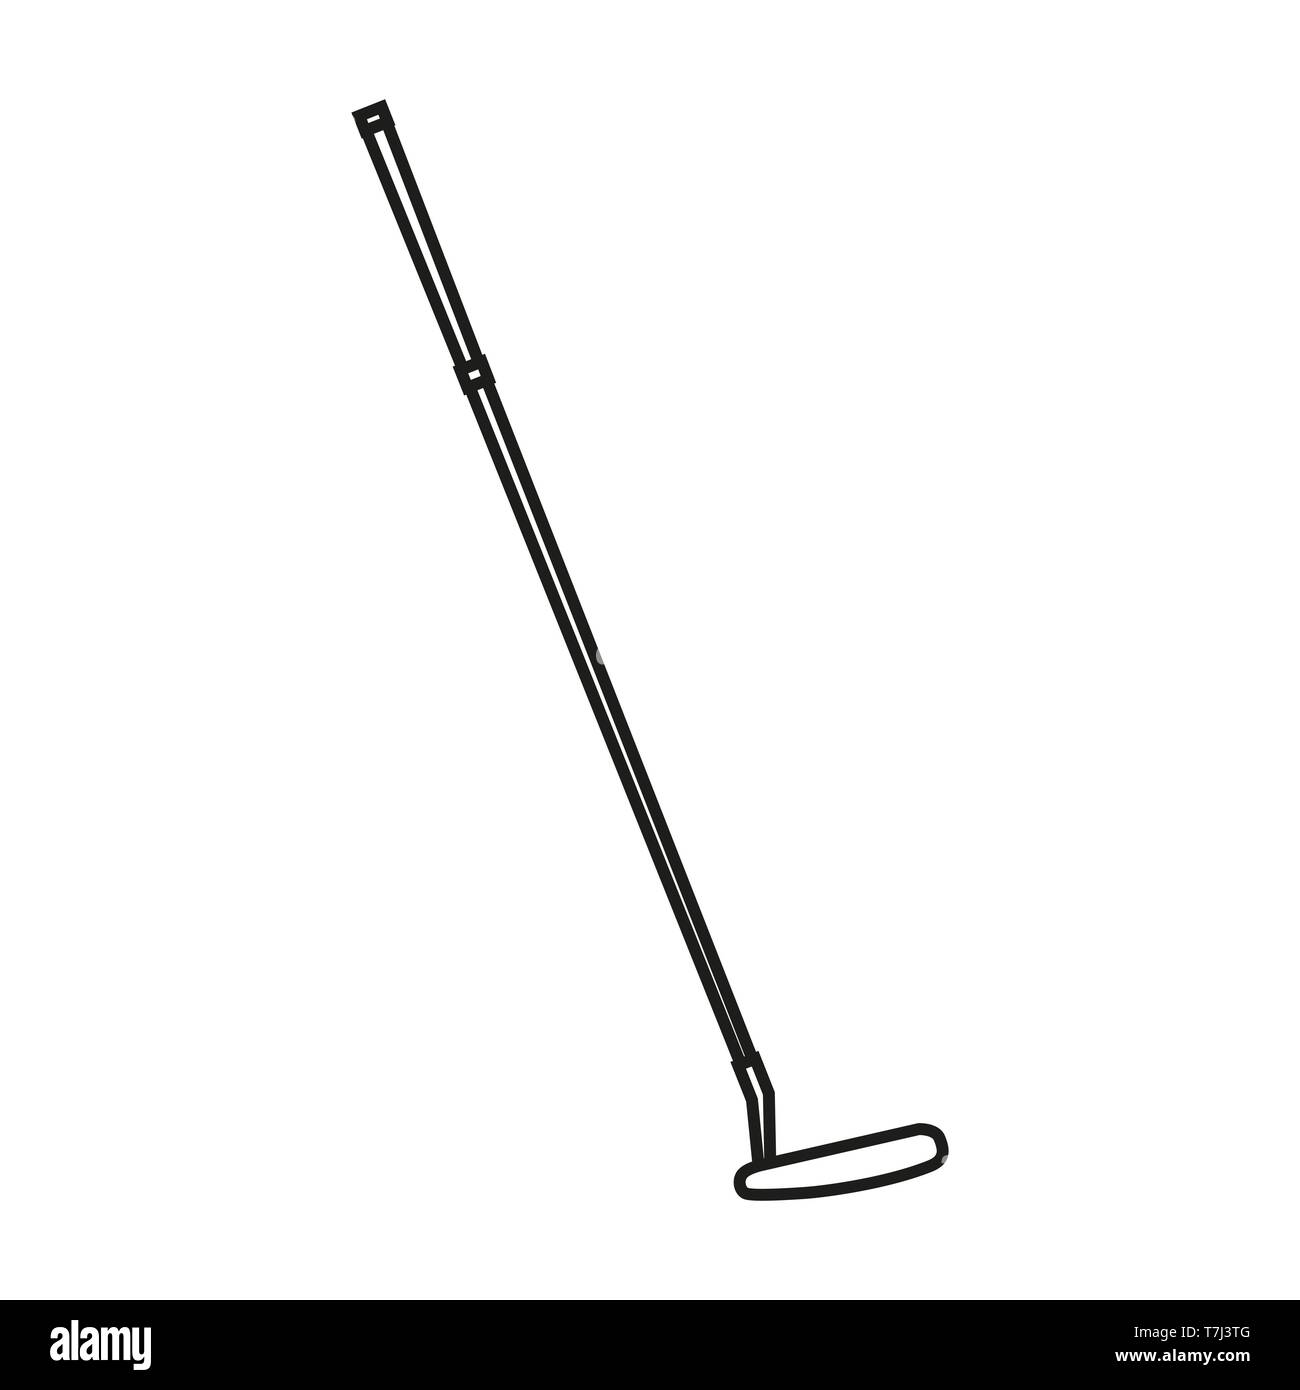 Gold golf tee Cut Out Stock Images & Pictures - Alamy